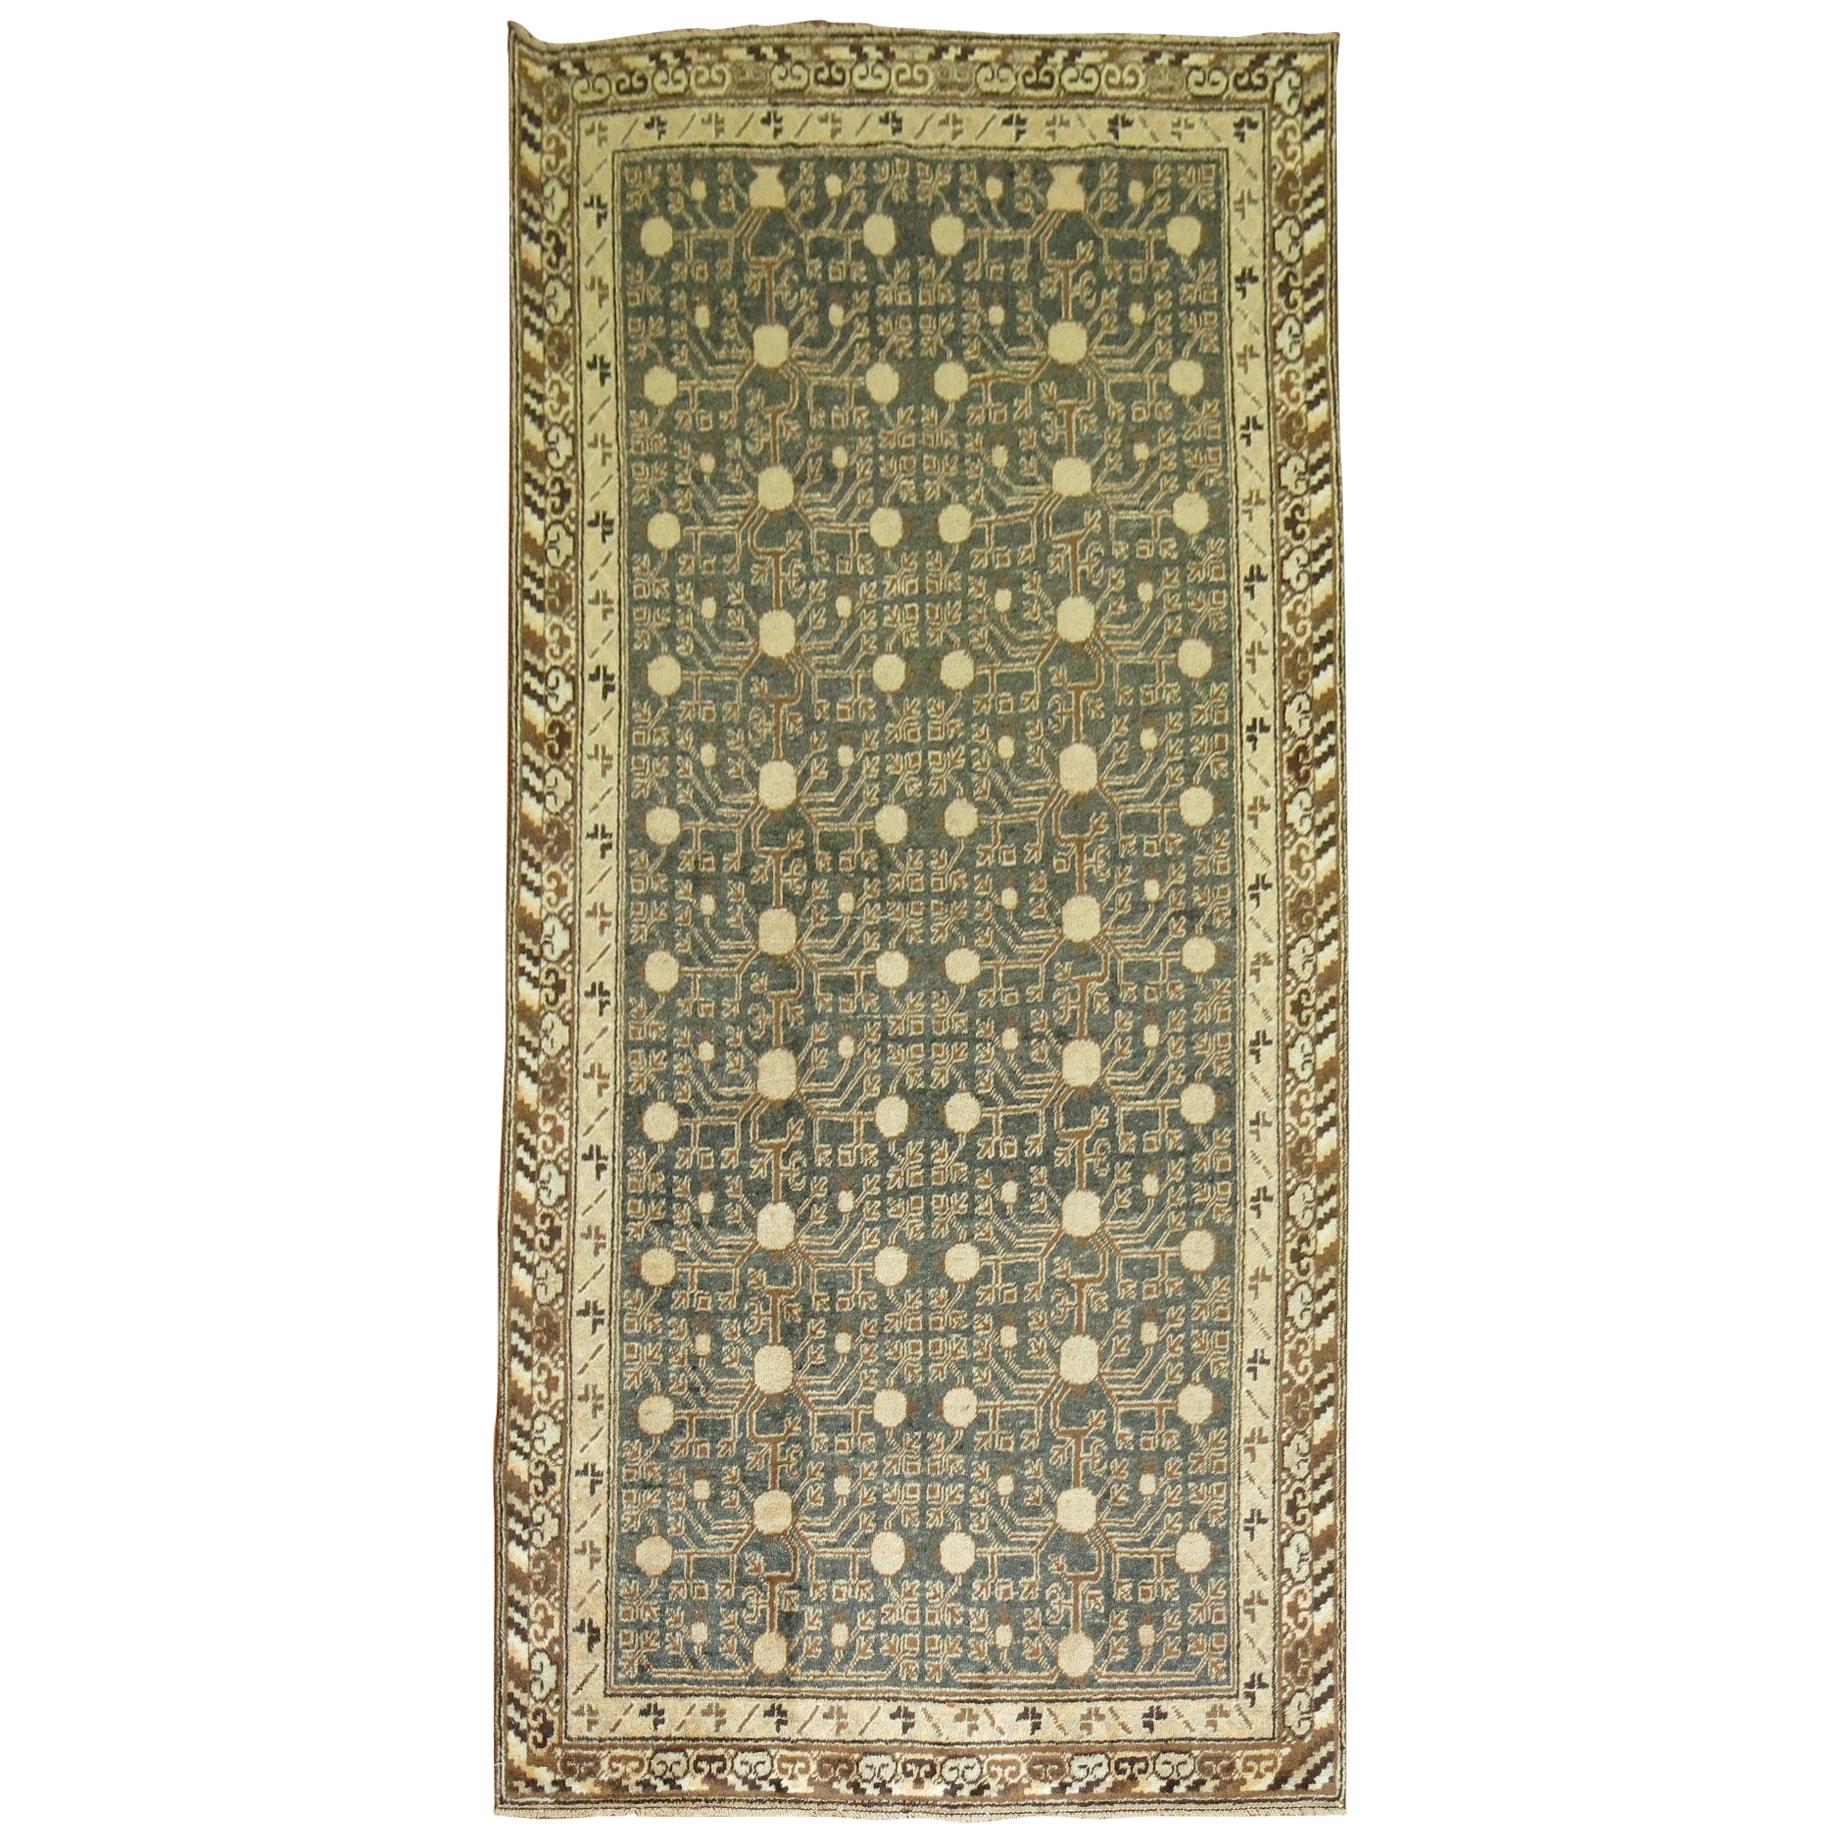 Khotan Rug in Olive Green and Brown